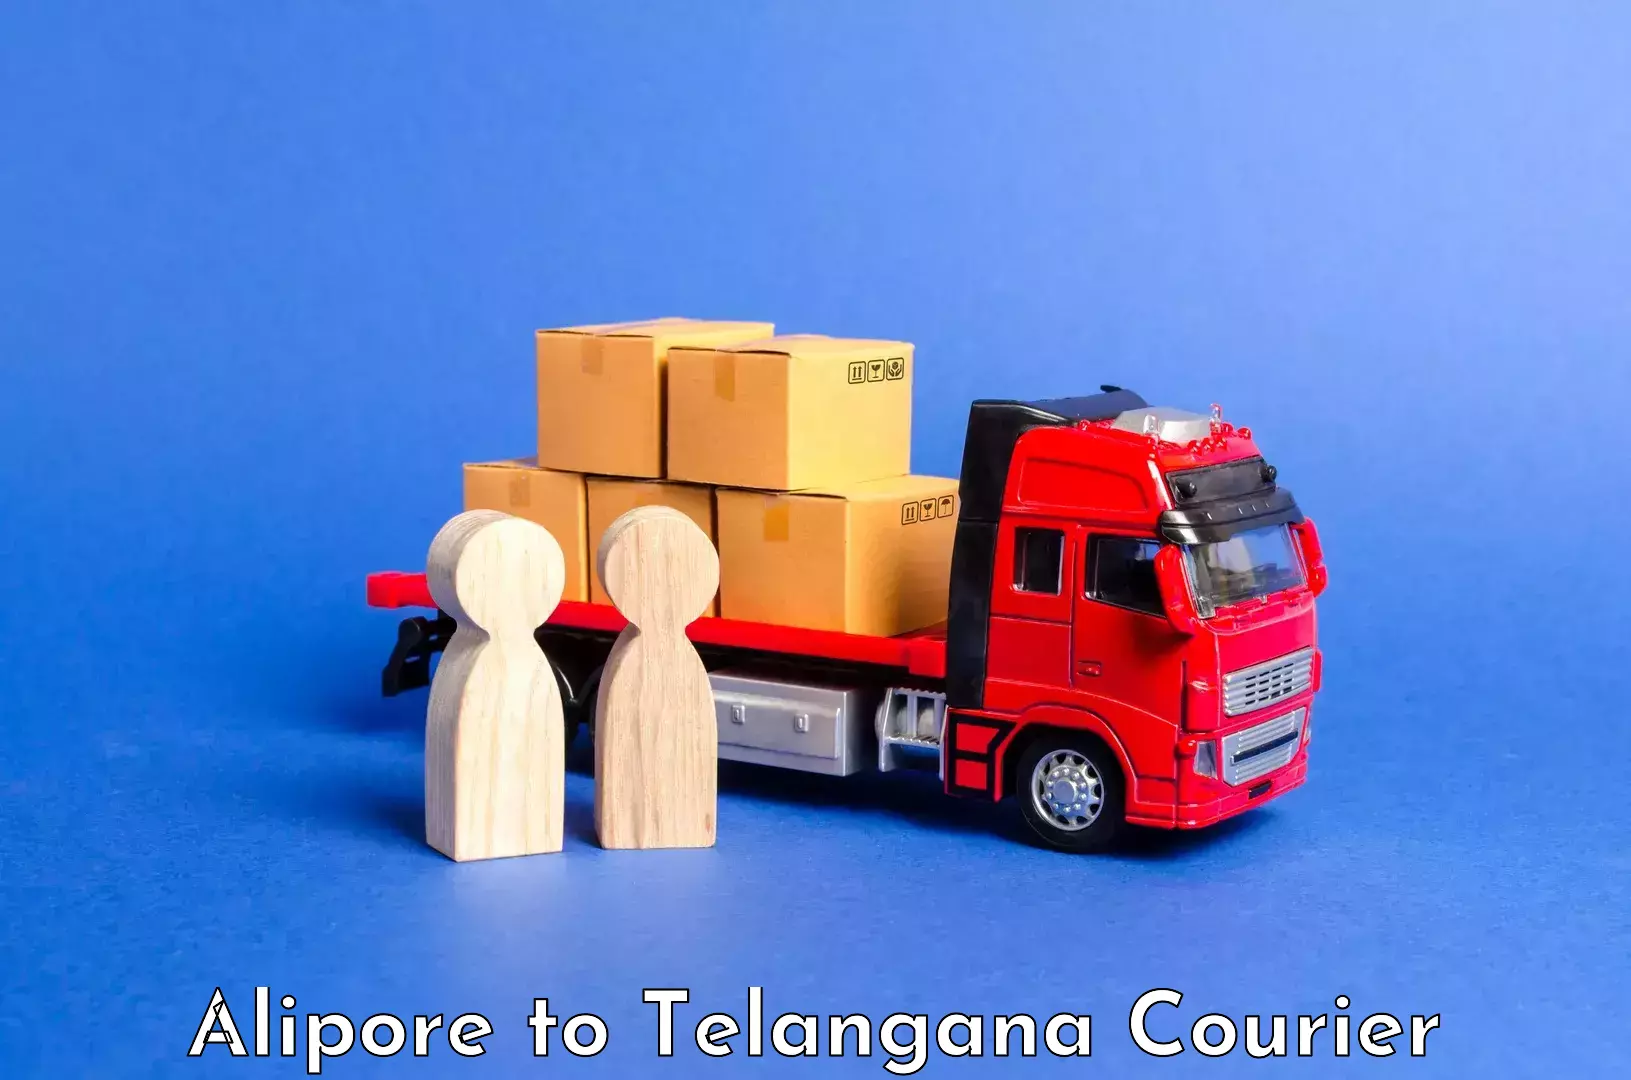 Luggage transport consultancy Alipore to Vemulawada